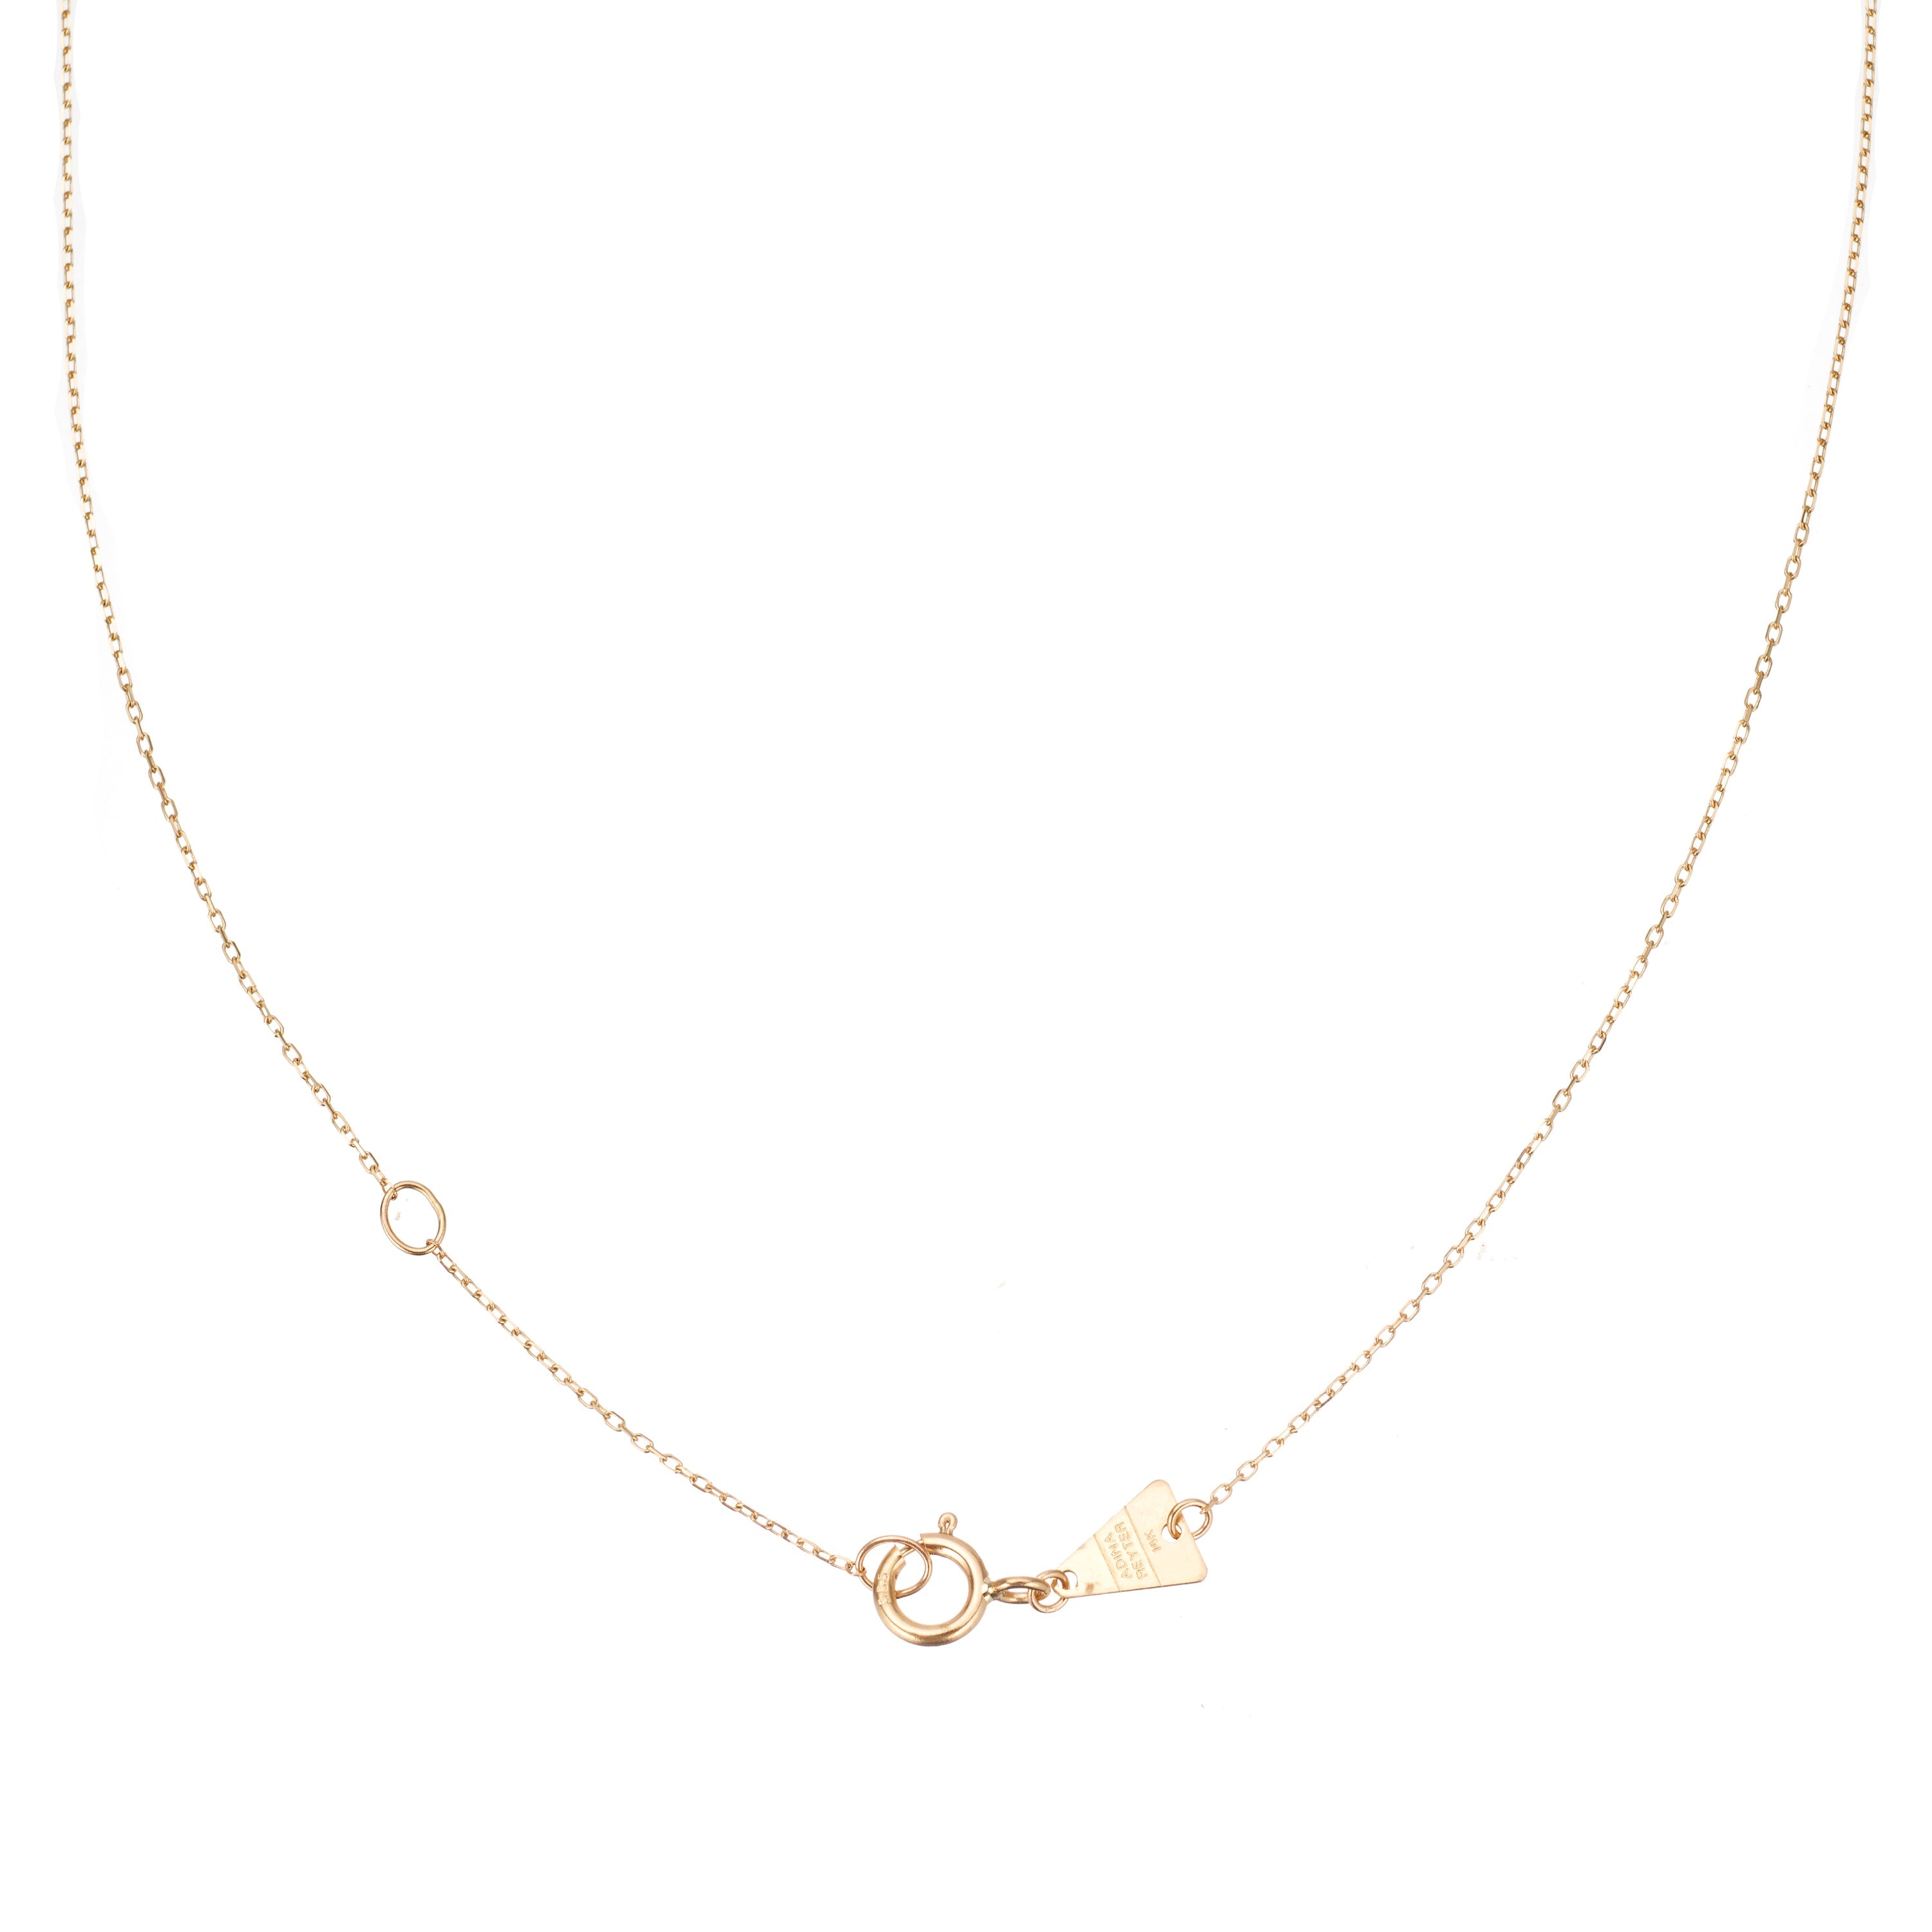 14k Gold Standard Cable Chain